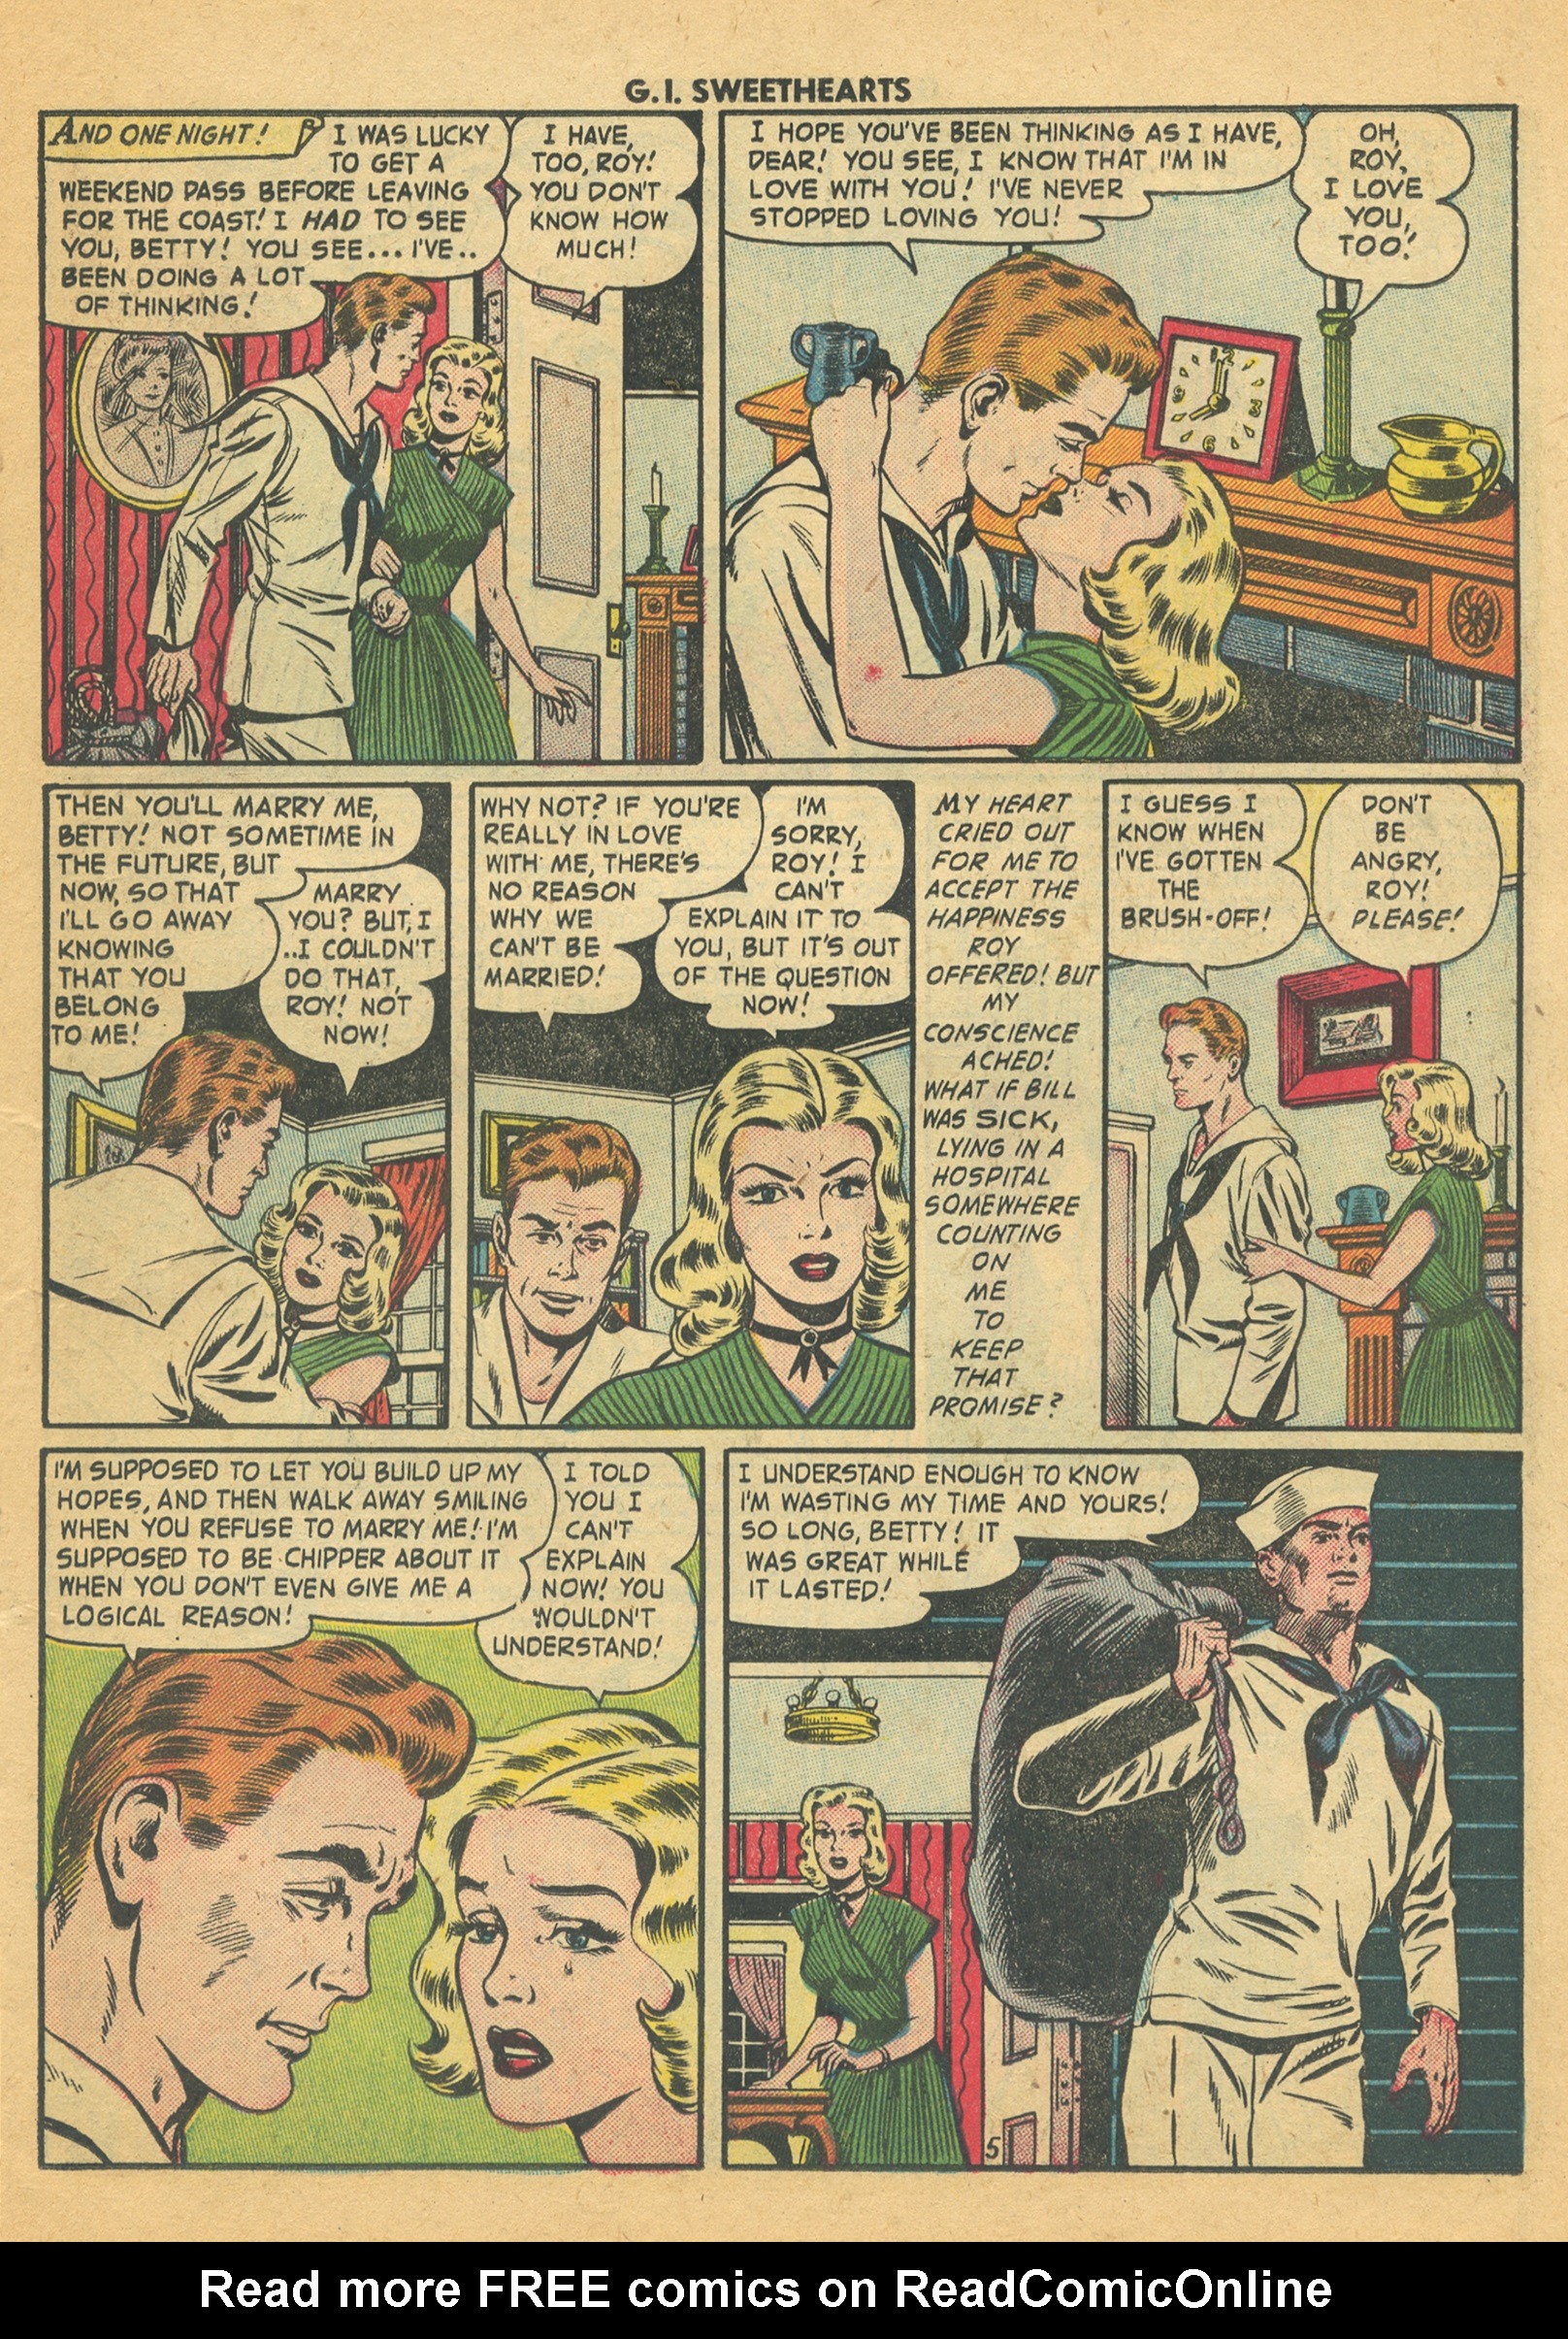 Read online G.I. Sweethearts comic -  Issue #45 - 15